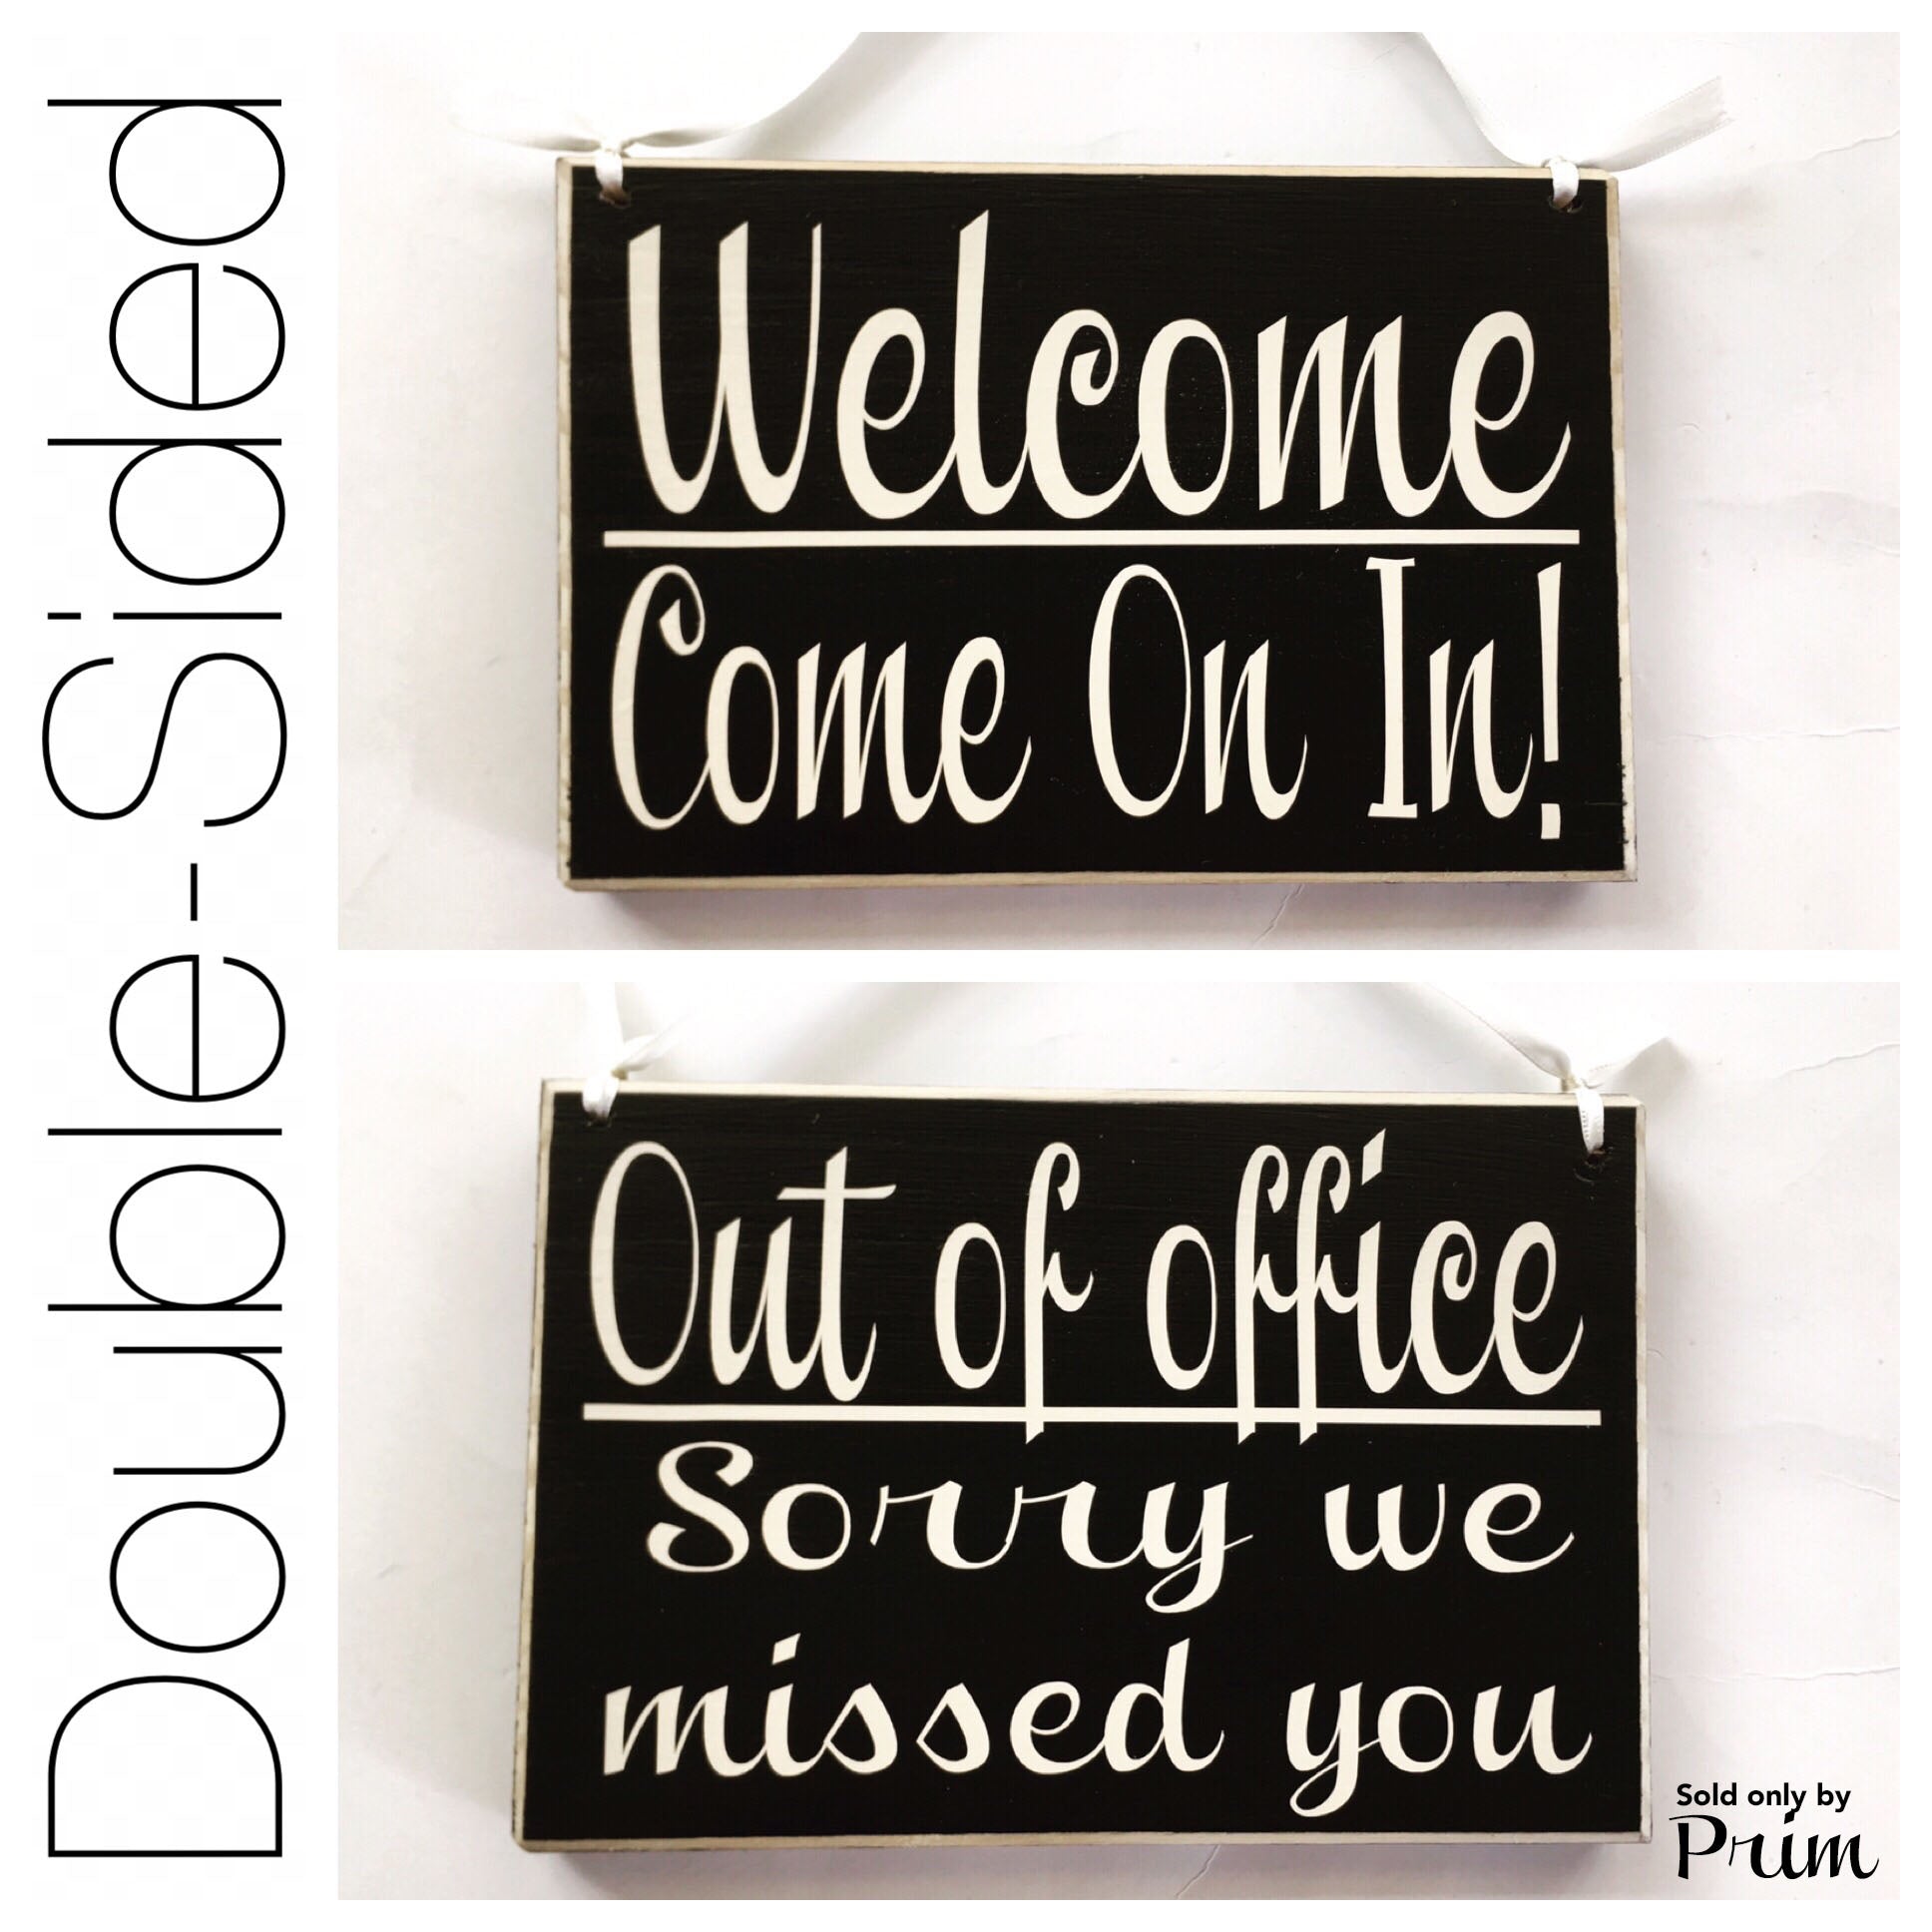 Two Sided 8x6 Out of Office Sorry We Missed You Welcome Come On In Custom Wood Sign Open Closed Spa Salon Office Door Hanger